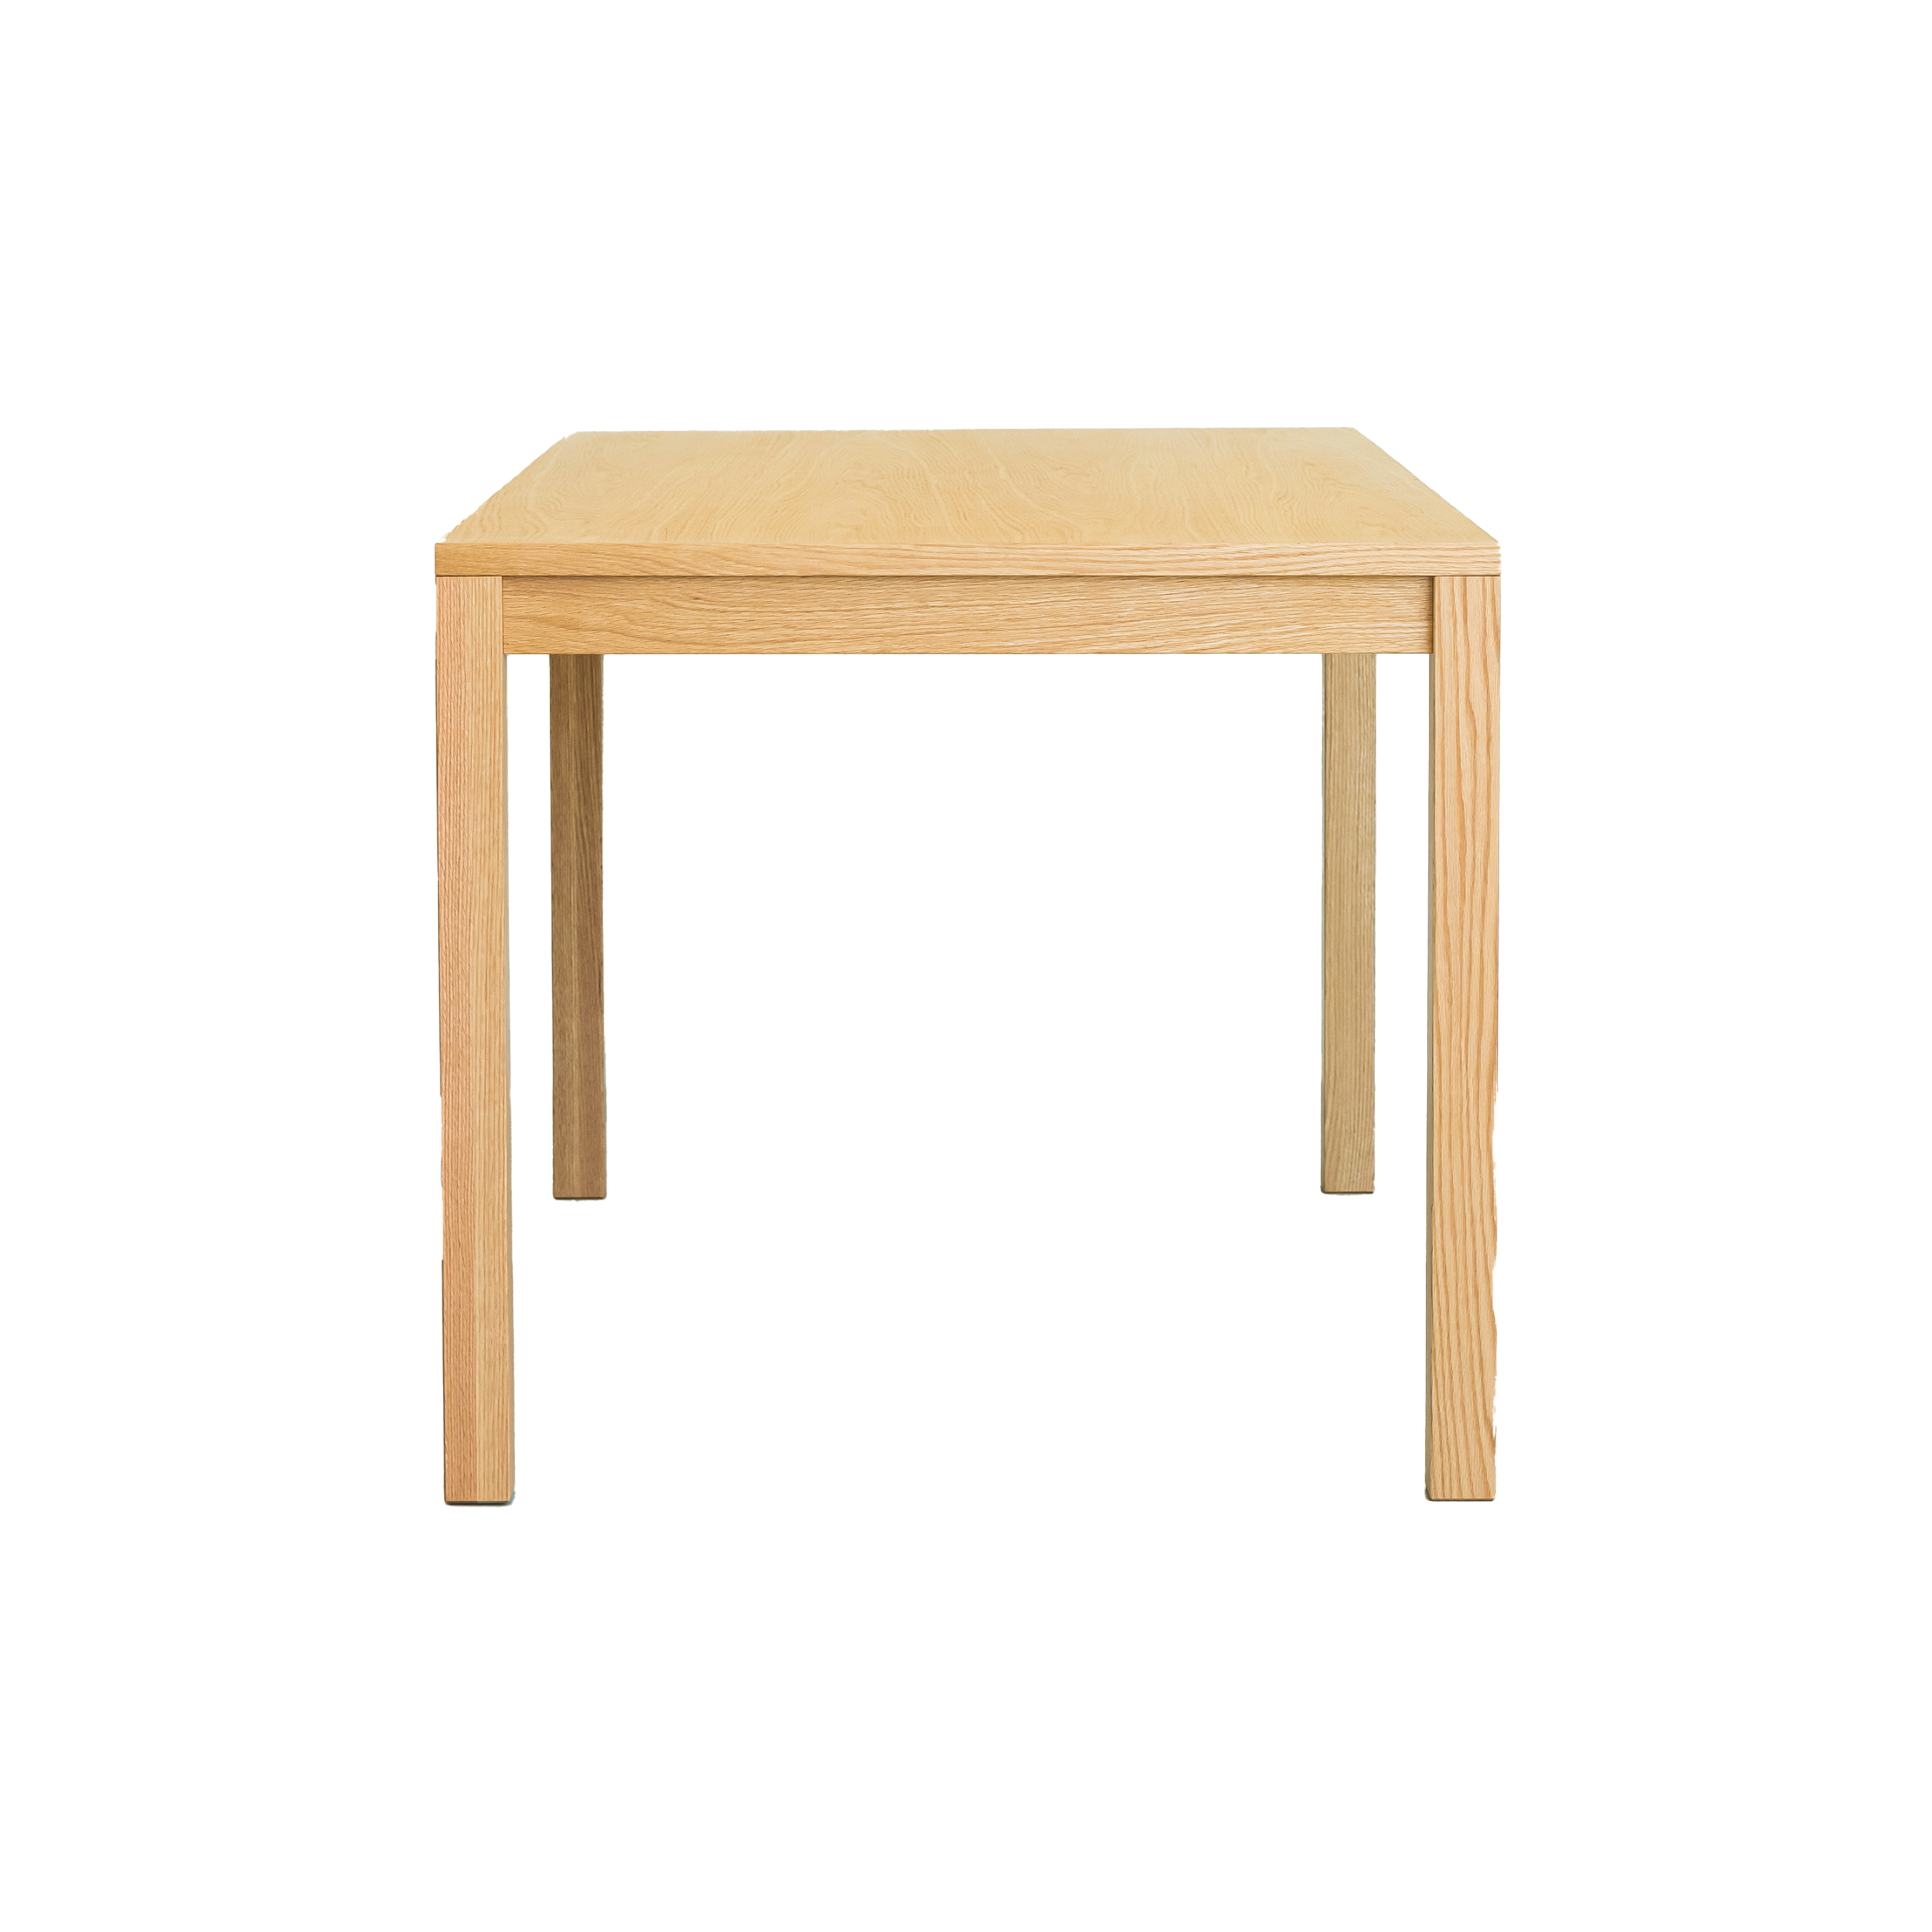 akel; DINING TABLE / アケルダイニングテーブル YAKDT1550-NA 背面